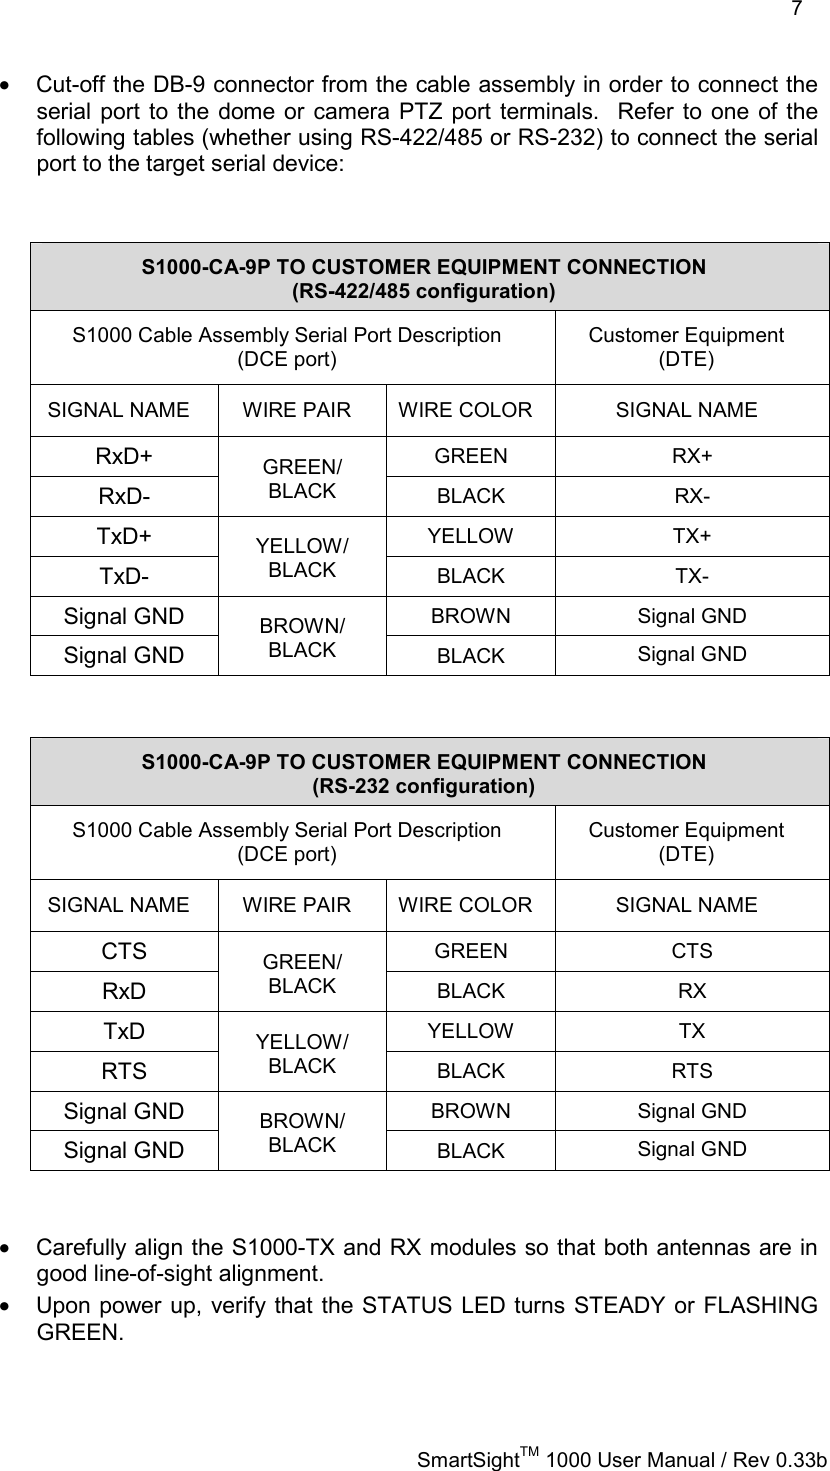    7   SmartSightTM 1000 User Manual / Rev 0.33b  •  Cut-off the DB-9 connector from the cable assembly in order to connect the serial port to the dome or camera PTZ port terminals.  Refer to one of the following tables (whether using RS-422/485 or RS-232) to connect the serial port to the target serial device:   S1000-CA-9P TO CUSTOMER EQUIPMENT CONNECTION                      (RS-422/485 configuration) S1000 Cable Assembly Serial Port Description      (DCE port) Customer Equipment        (DTE) SIGNAL NAME  WIRE PAIR  WIRE COLOR  SIGNAL NAME RxD+  GREEN RX+ RxD- GREEN/ BLACK  BLACK RX- TxD+  YELLOW TX+ TxD- YELLOW/ BLACK  BLACK TX- Signal GND  BROWN Signal GND Signal GND BROWN/ BLACK  BLACK  Signal GND   S1000-CA-9P TO CUSTOMER EQUIPMENT CONNECTION                      (RS-232 configuration) S1000 Cable Assembly Serial Port Description      (DCE port) Customer Equipment        (DTE) SIGNAL NAME  WIRE PAIR  WIRE COLOR  SIGNAL NAME CTS  GREEN CTS RxD GREEN/ BLACK  BLACK RX TxD  YELLOW TX RTS YELLOW/ BLACK  BLACK RTS Signal GND  BROWN Signal GND Signal GND BROWN/ BLACK  BLACK  Signal GND   •  Carefully align the S1000-TX and RX modules so that both antennas are in good line-of-sight alignment.    •  Upon power up, verify that the STATUS LED turns STEADY or FLASHING GREEN.    